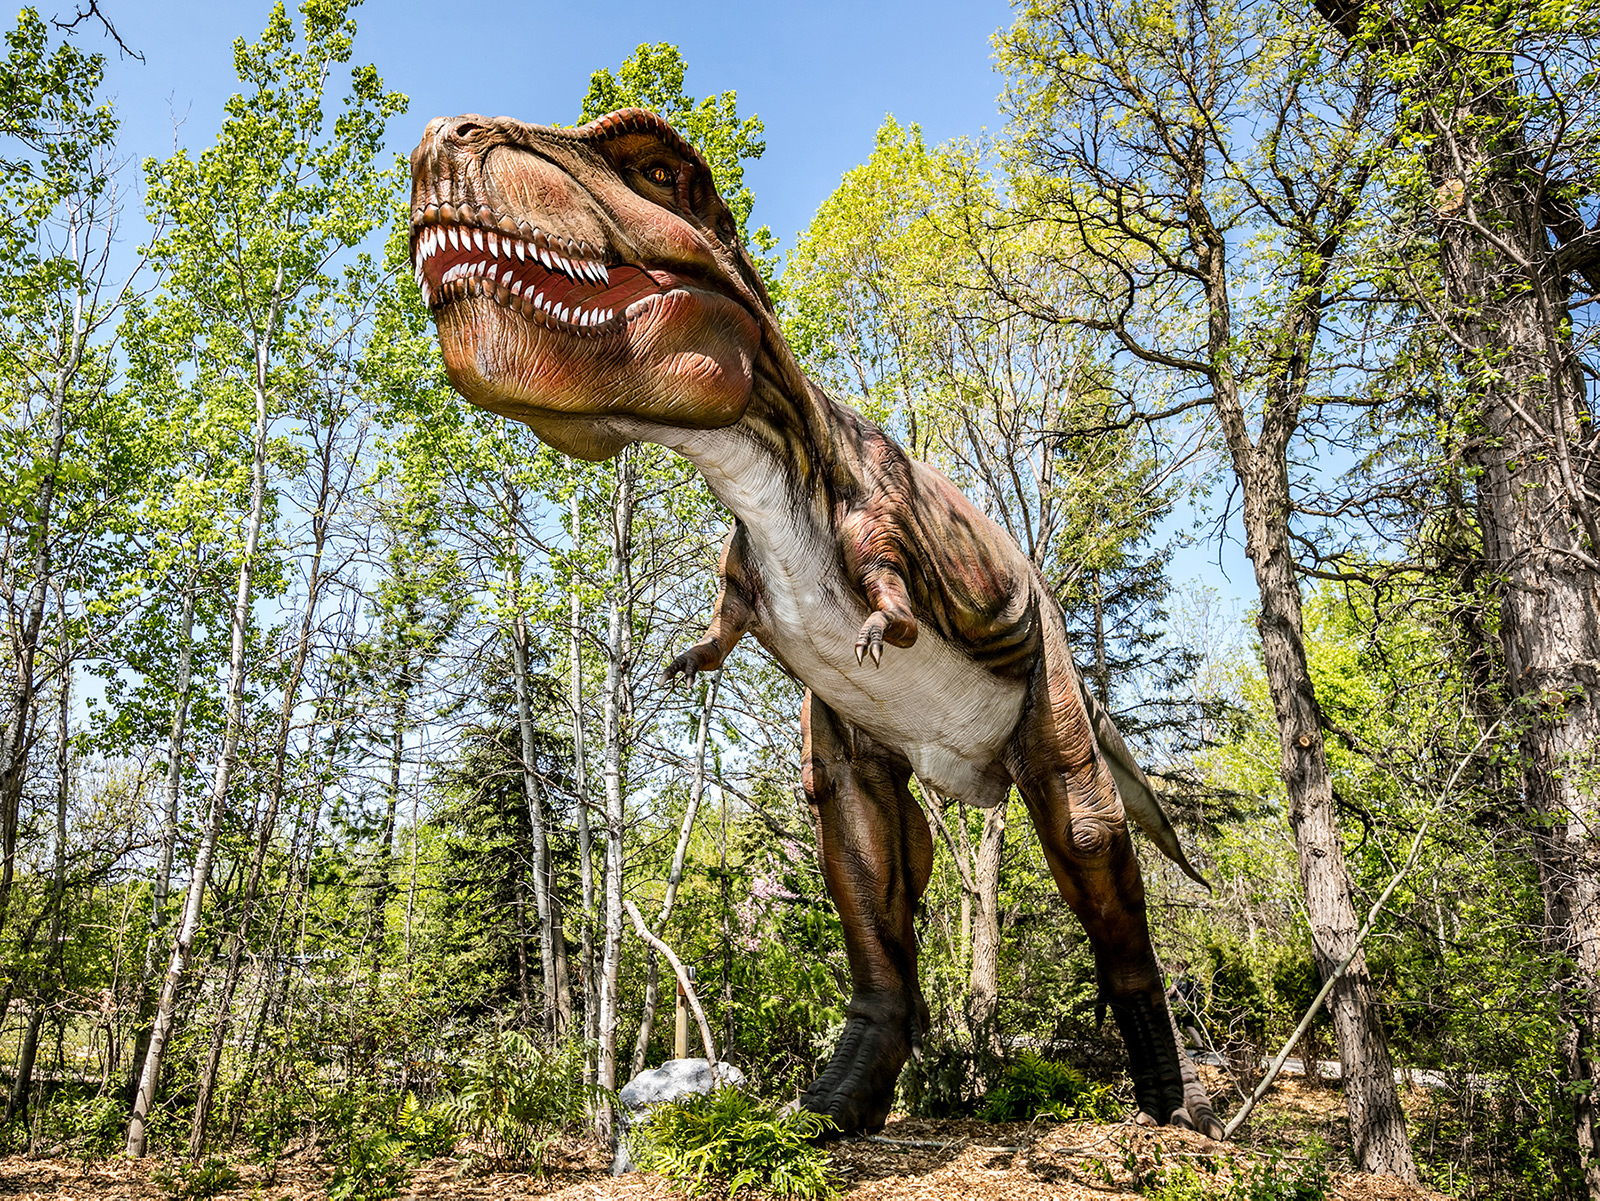 animatronic t-rex in outdoors forested area